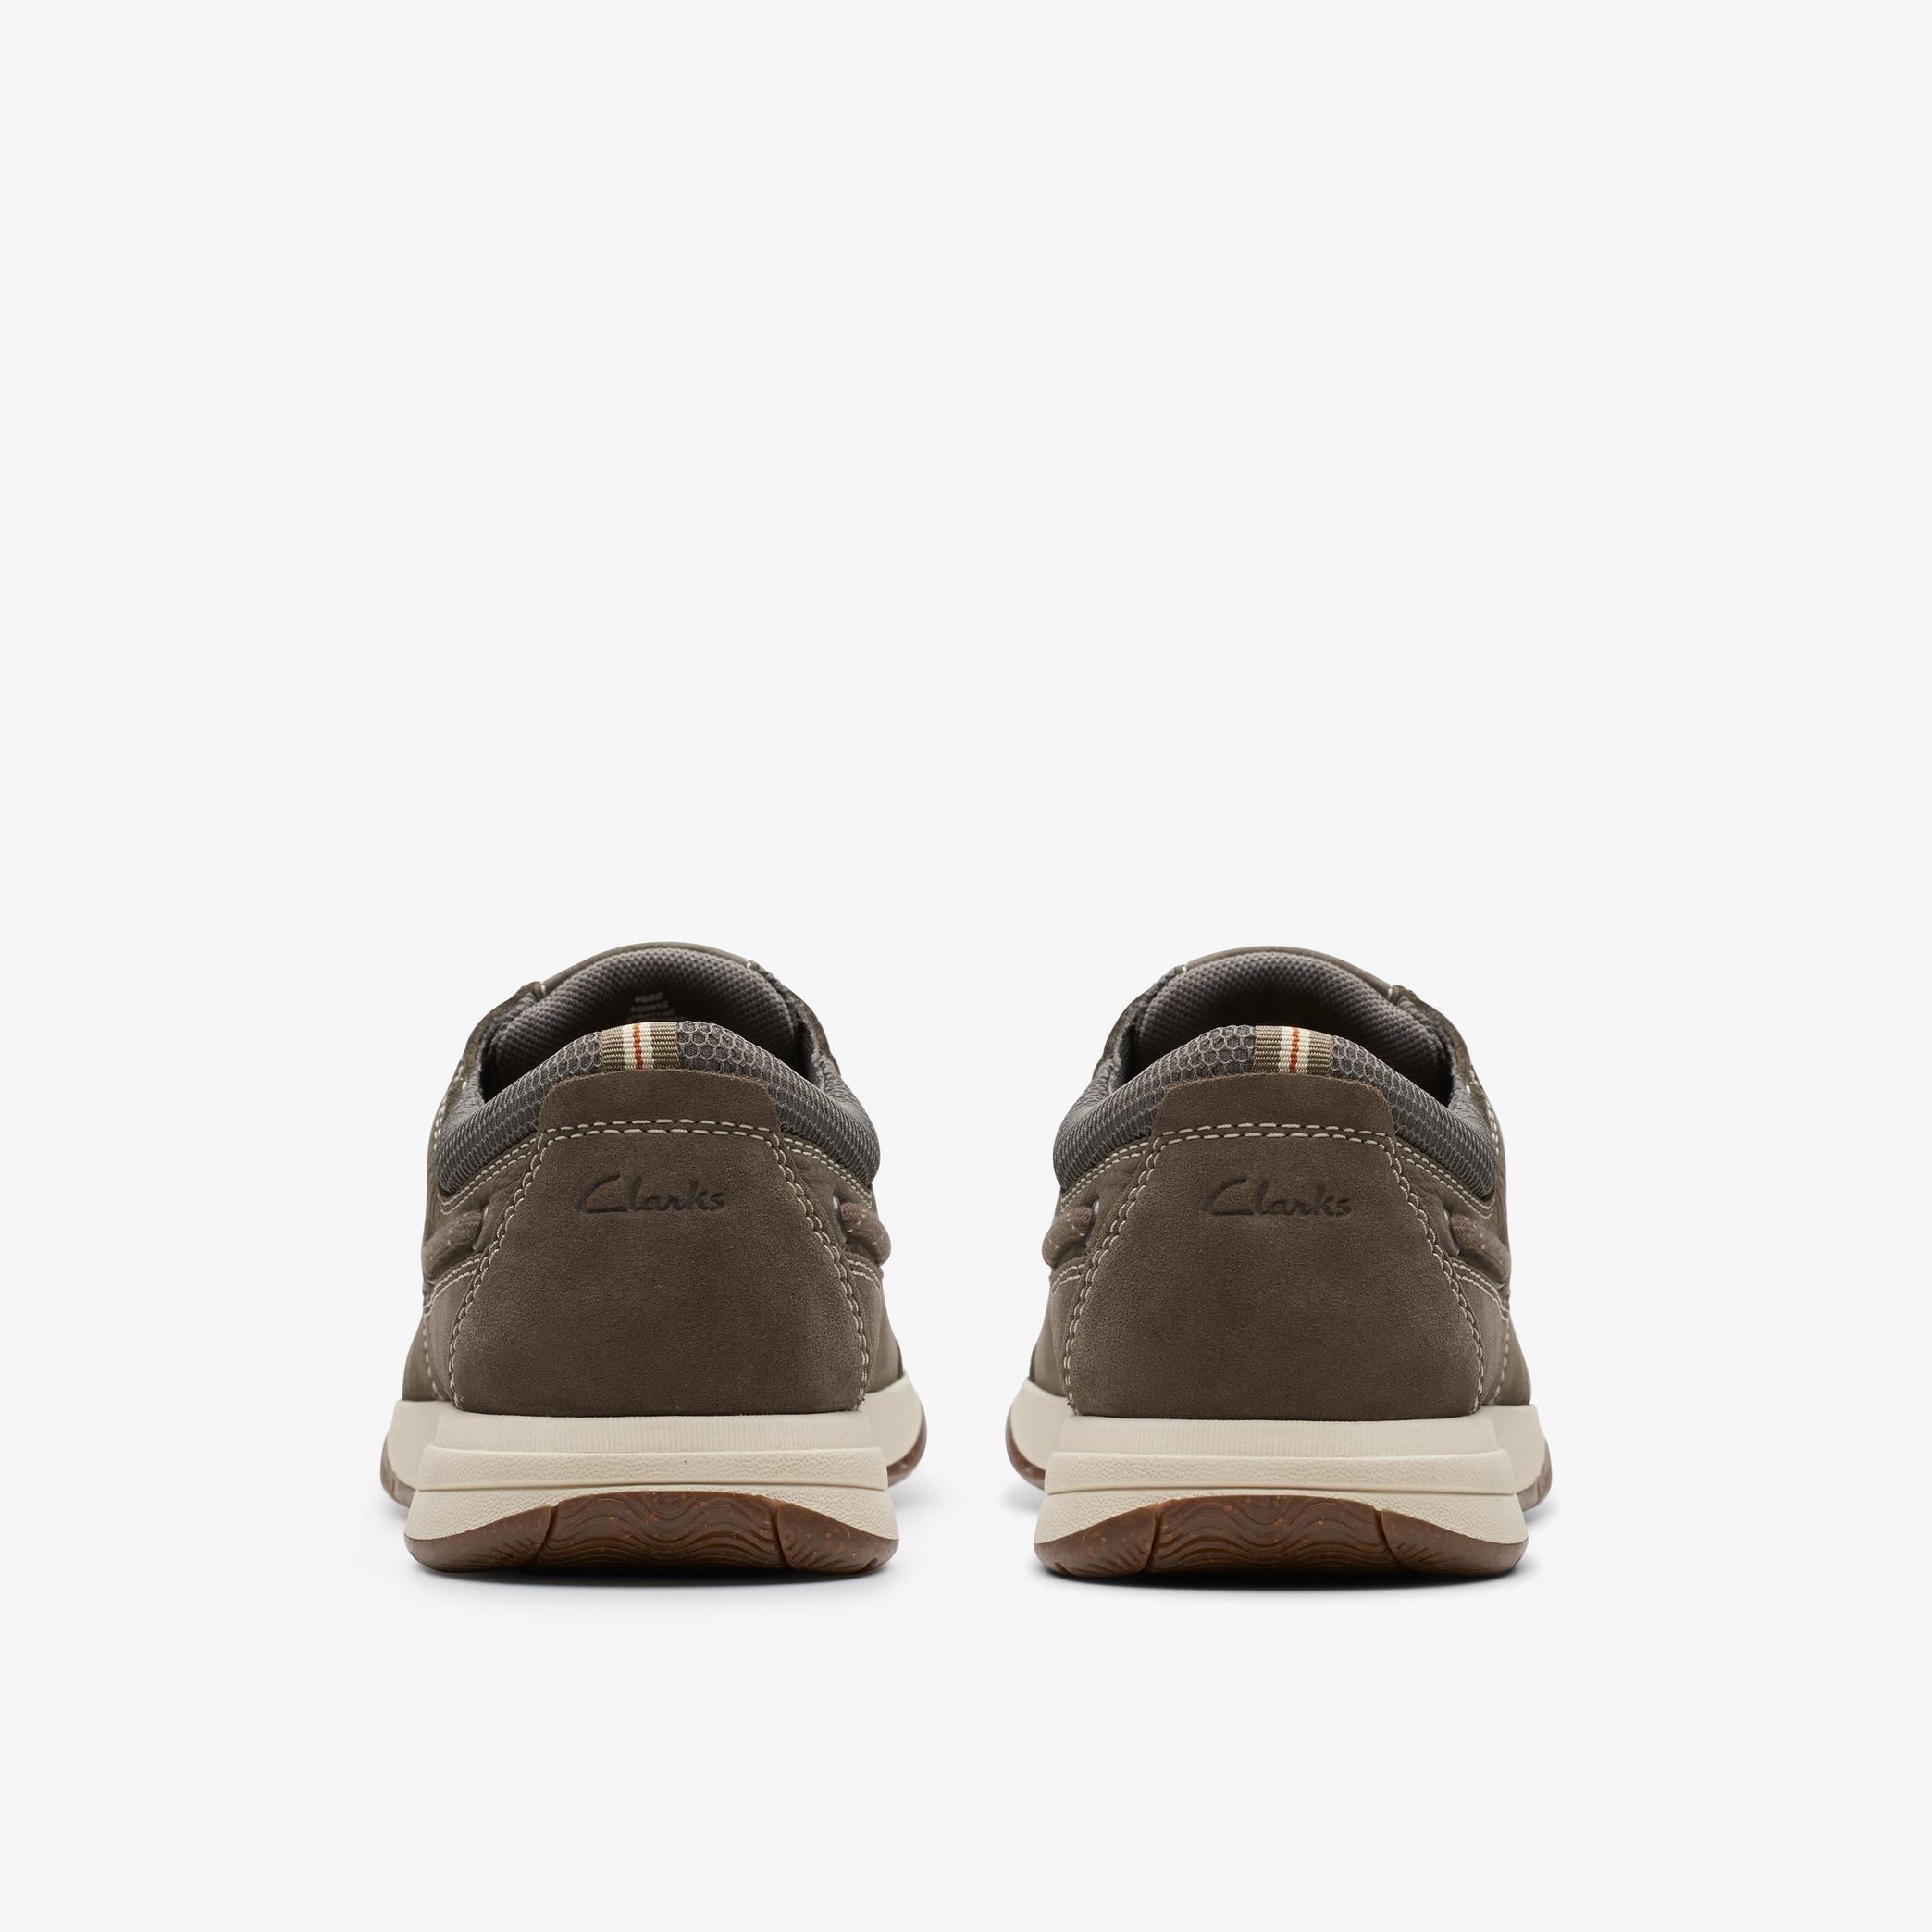 Sailview Lace Taupe Nubuck Boat Shoes, view 6 of 8